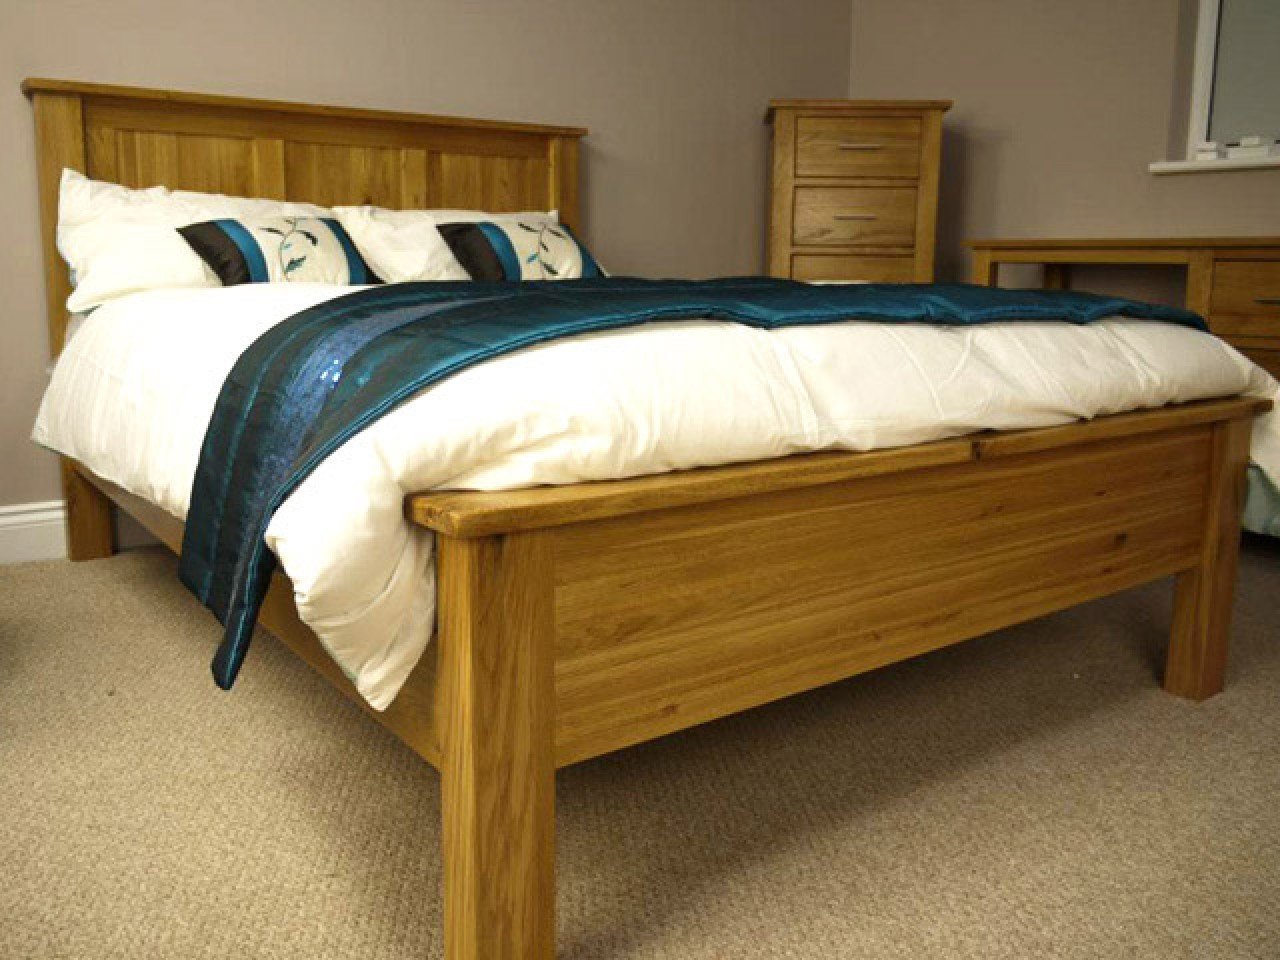 How to Build a Wooden Bed Frame: 22 Interesting Ways | Guide Patterns